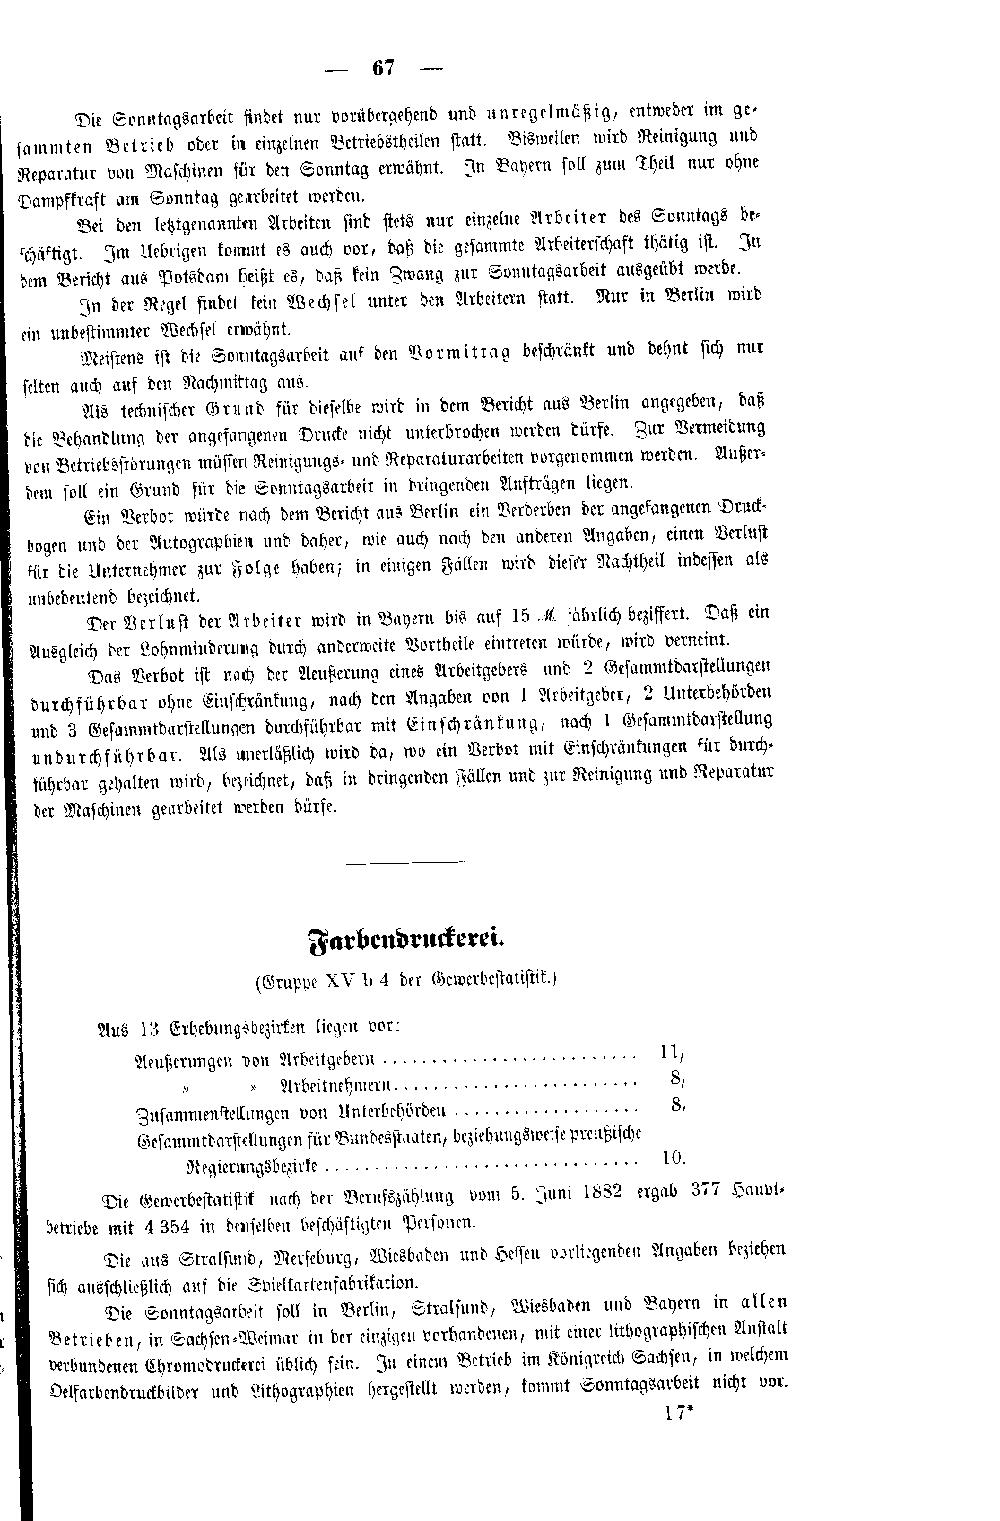 Scan of page 533